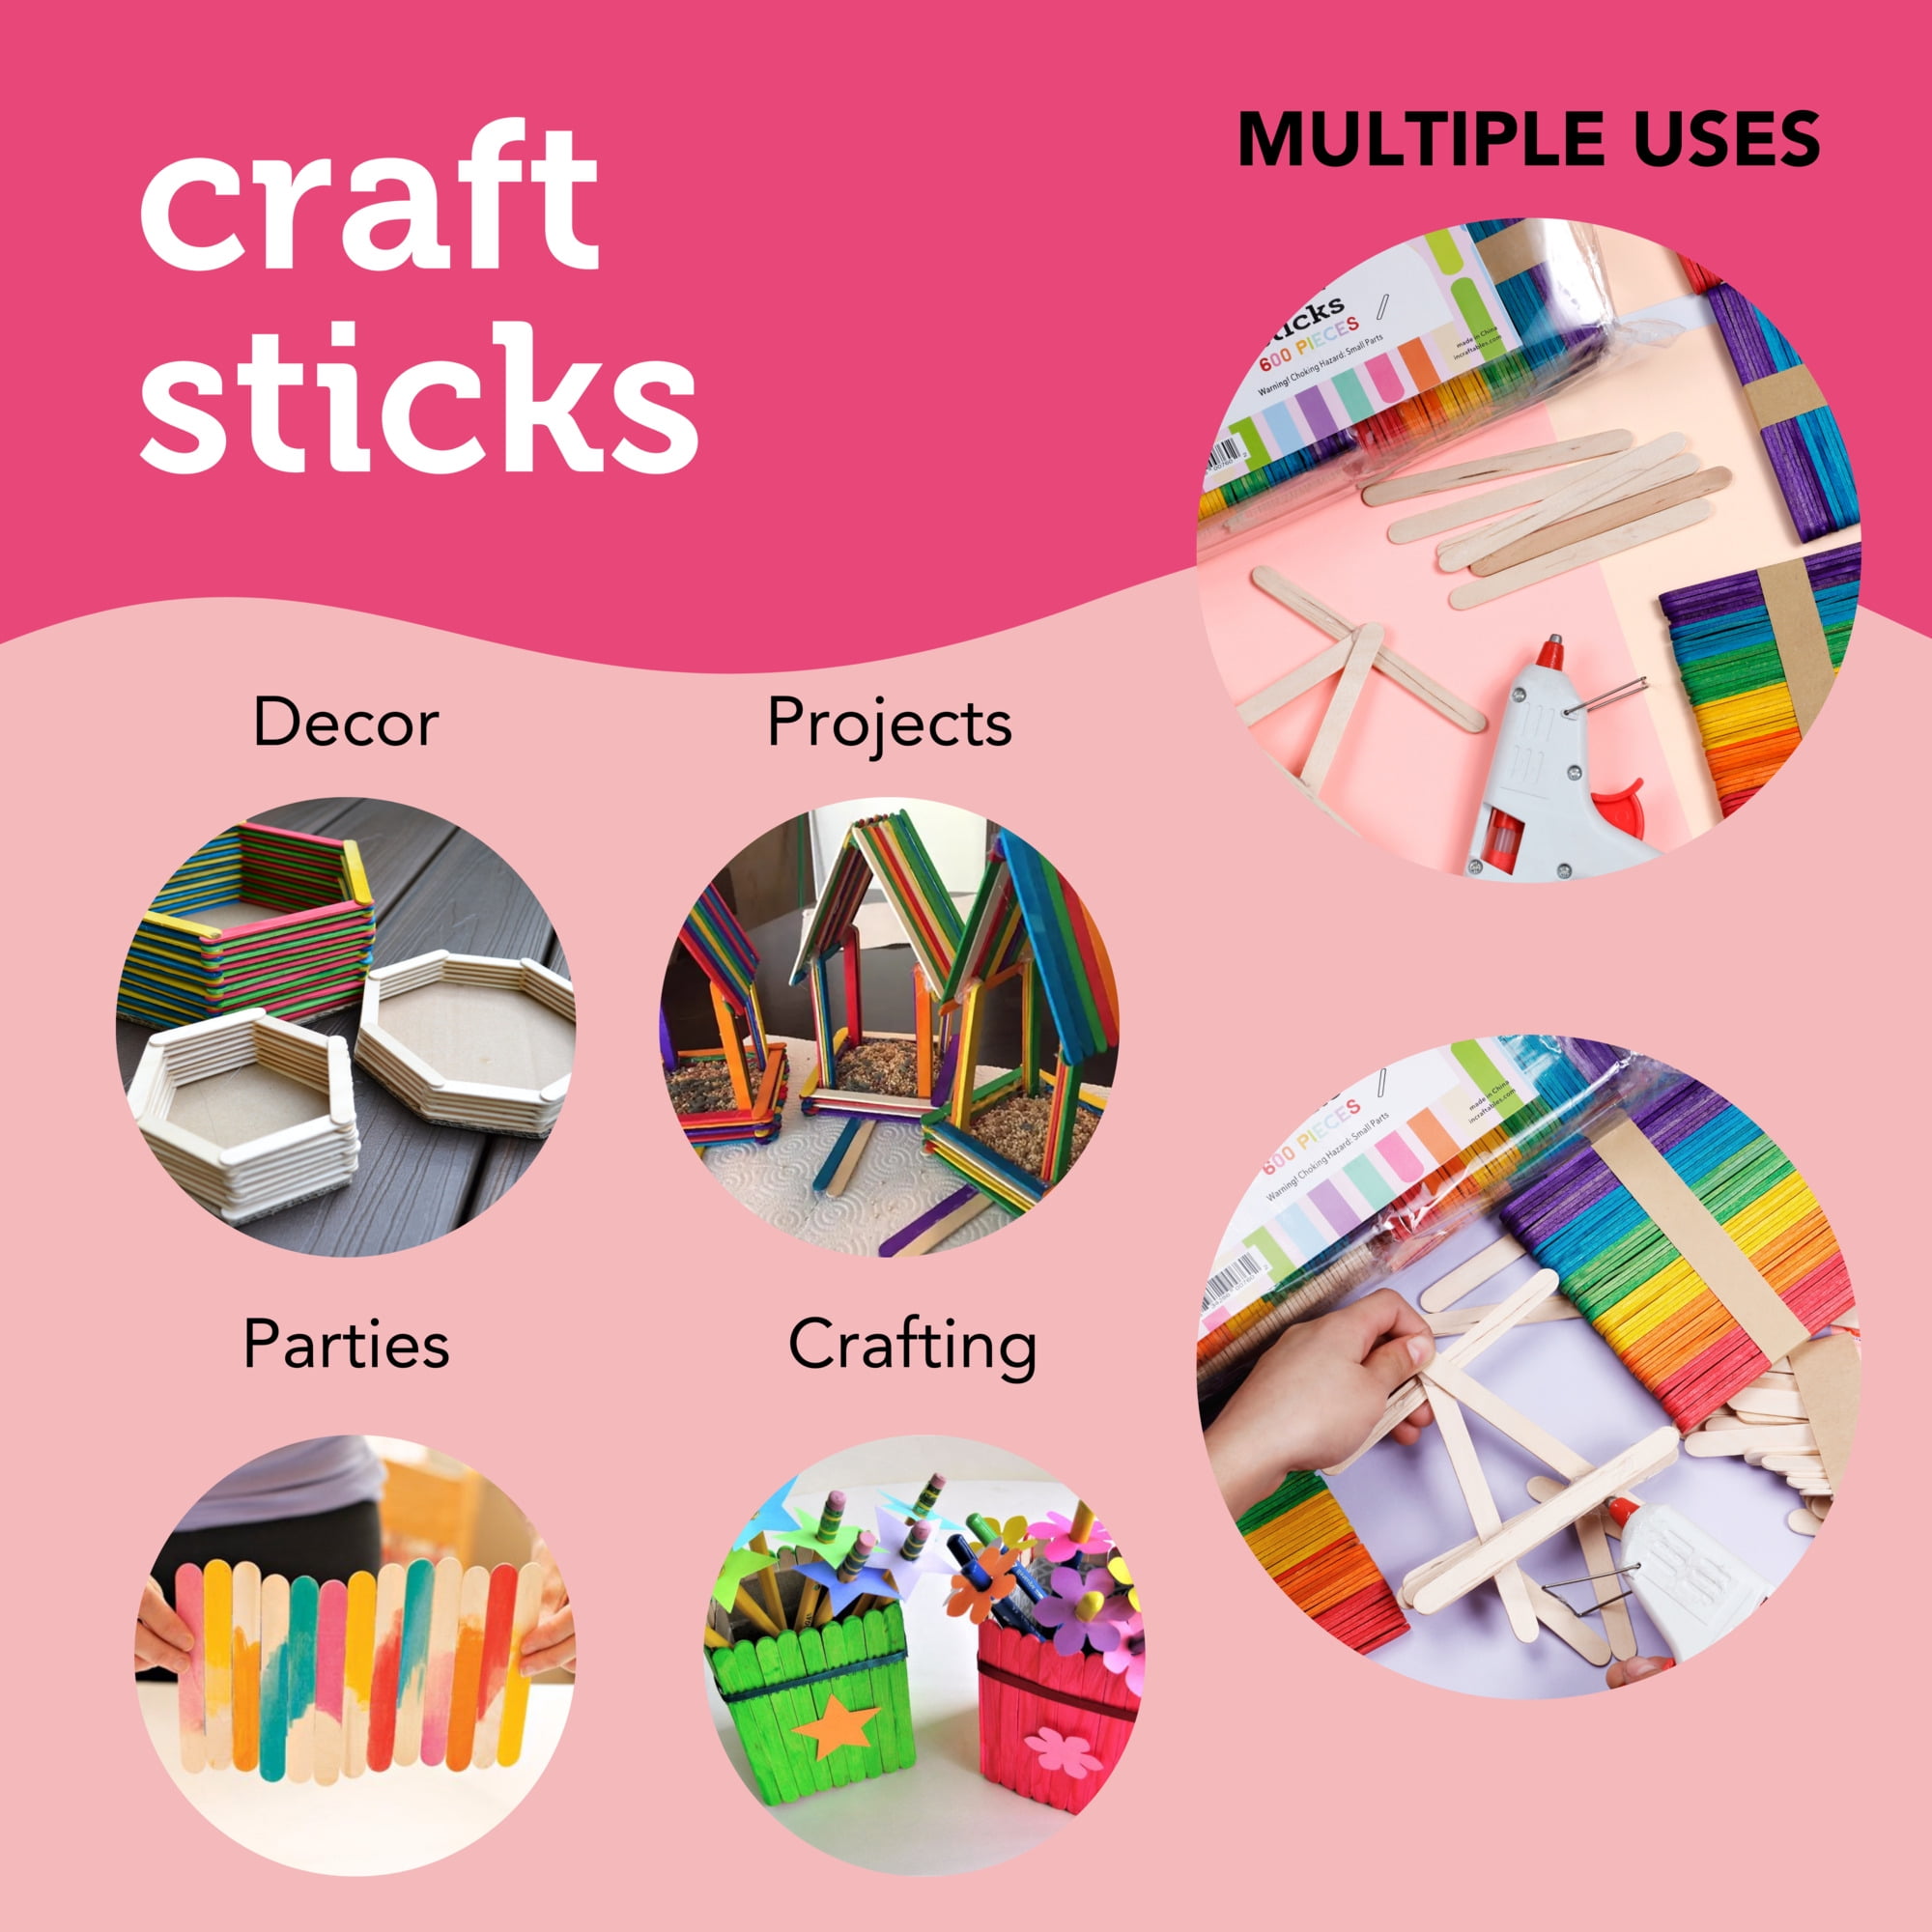 Incraftables Colored Popsicle Sticks for Crafts 600pcs (7 Colors)